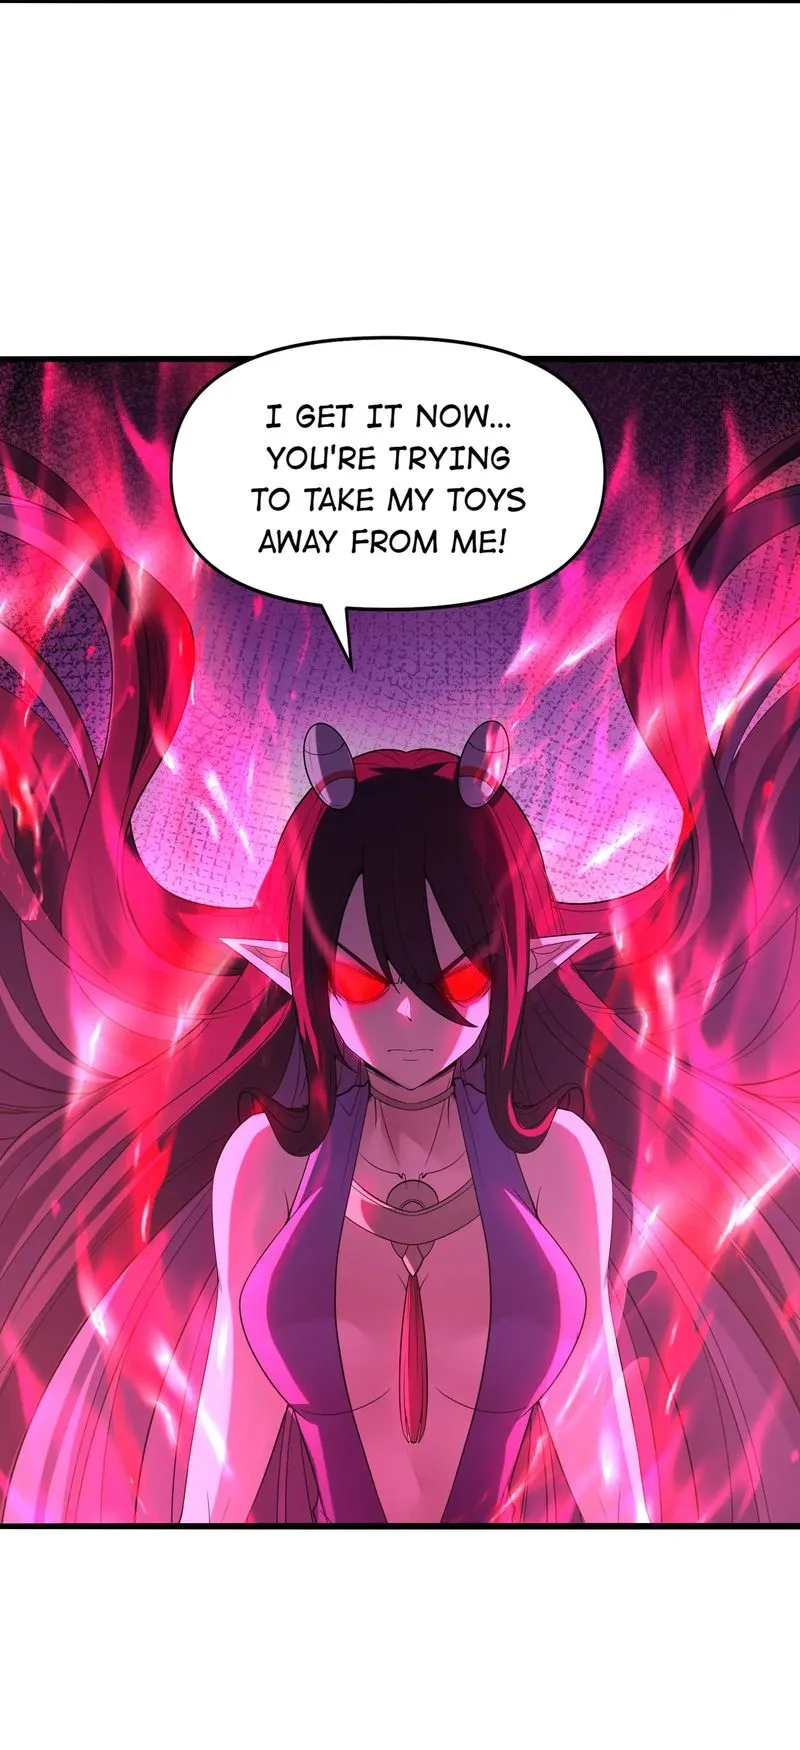 My Harem Is Entirely Female Demon Villains chapter 74